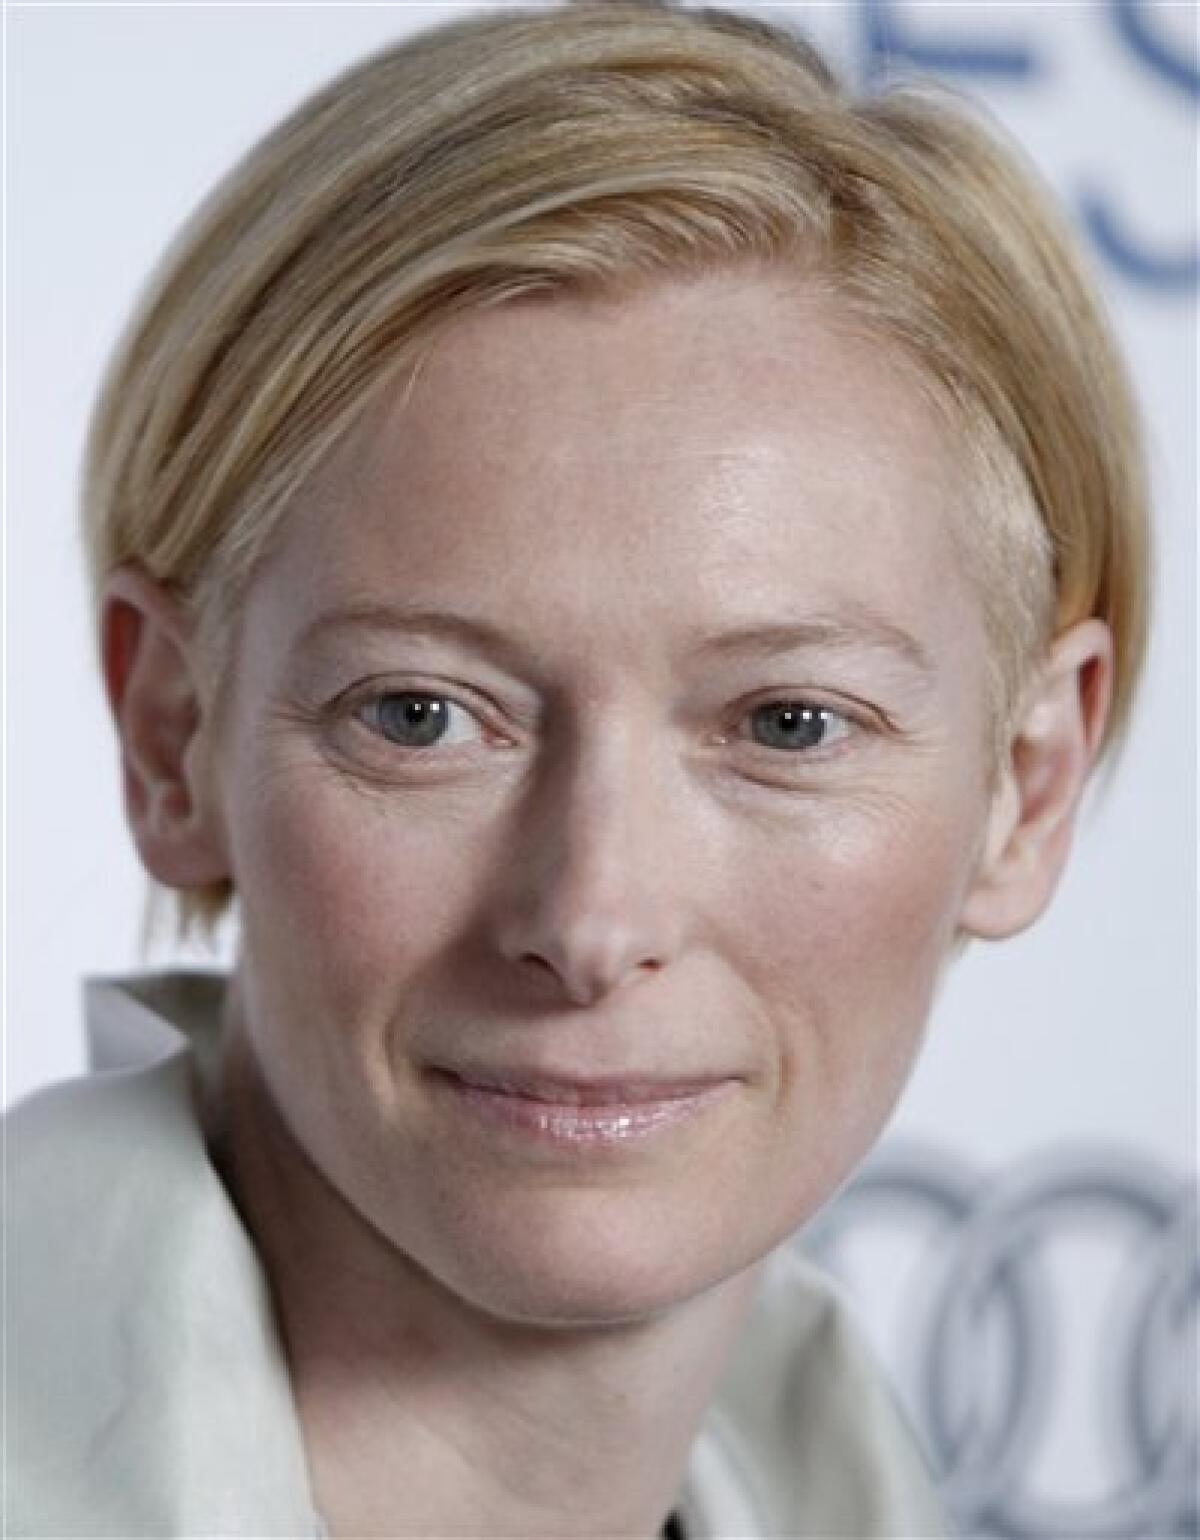 FILE - In this Nov. 5, 2008 photo, Actress Tilda Swinton arrives at a tribute held in her honor during AFI Fest 2008 in Los Angeles. Swinton wasn't nominated for an Academy Award for her role in “We Need to Talk About Kevin,” but she wasn't sad after hearing the news. She not only starred in “We Need to Talk about Kevin,” but also served as an executive producer. Swinton was nominated for a Golden Globe for her role in the film, and she said being nominated for any major award was a win for the movie. (AP Photo/Matt Sayles)